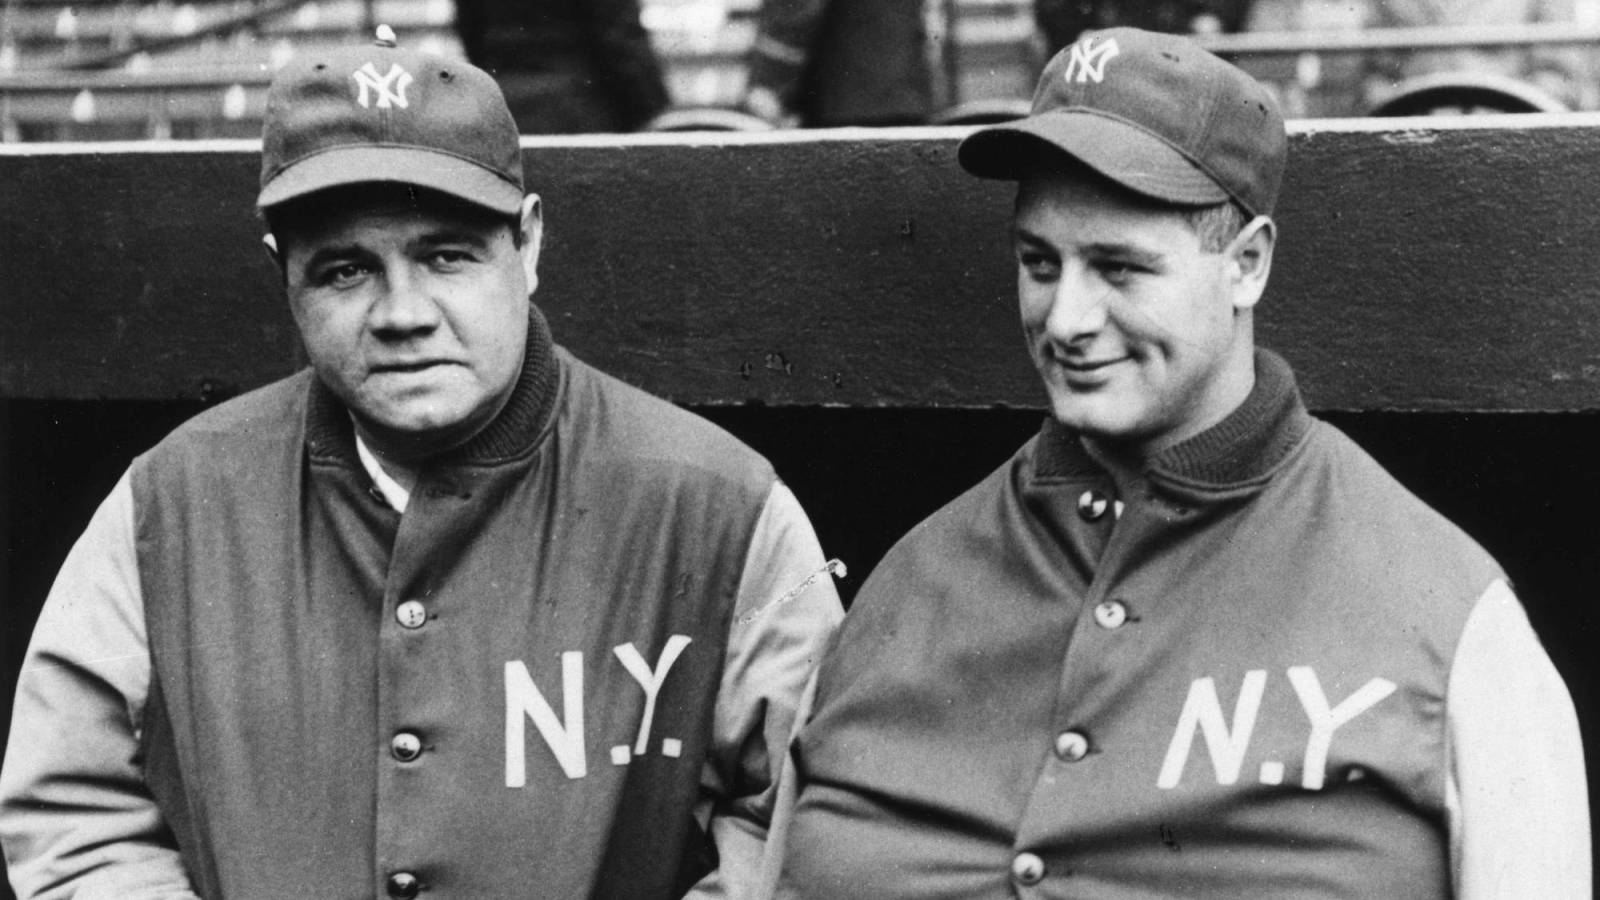 Signed Ruth, Gehrig photo expected to fetch $500K at auction